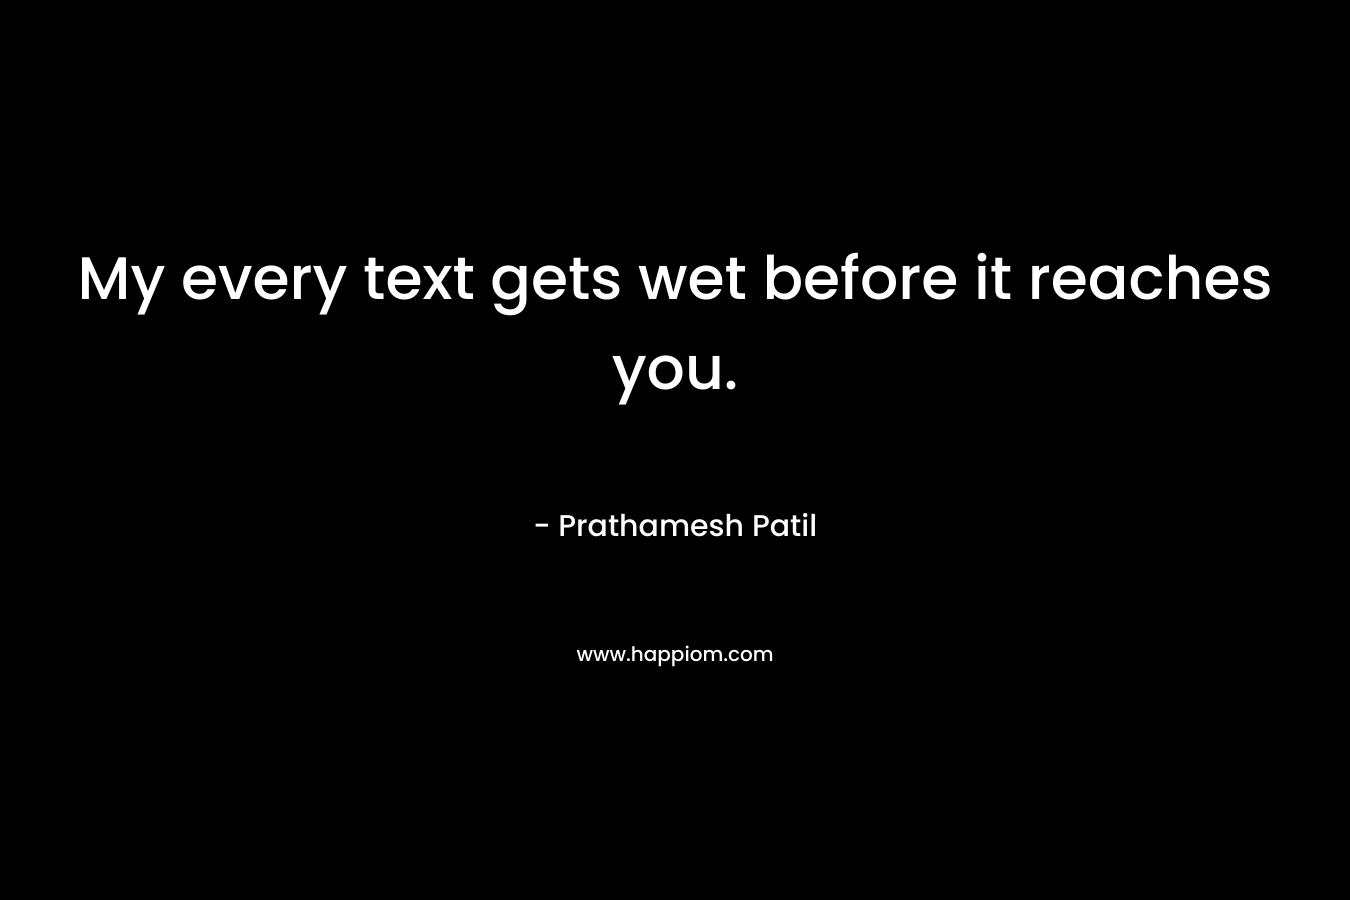 My every text gets wet before it reaches you.